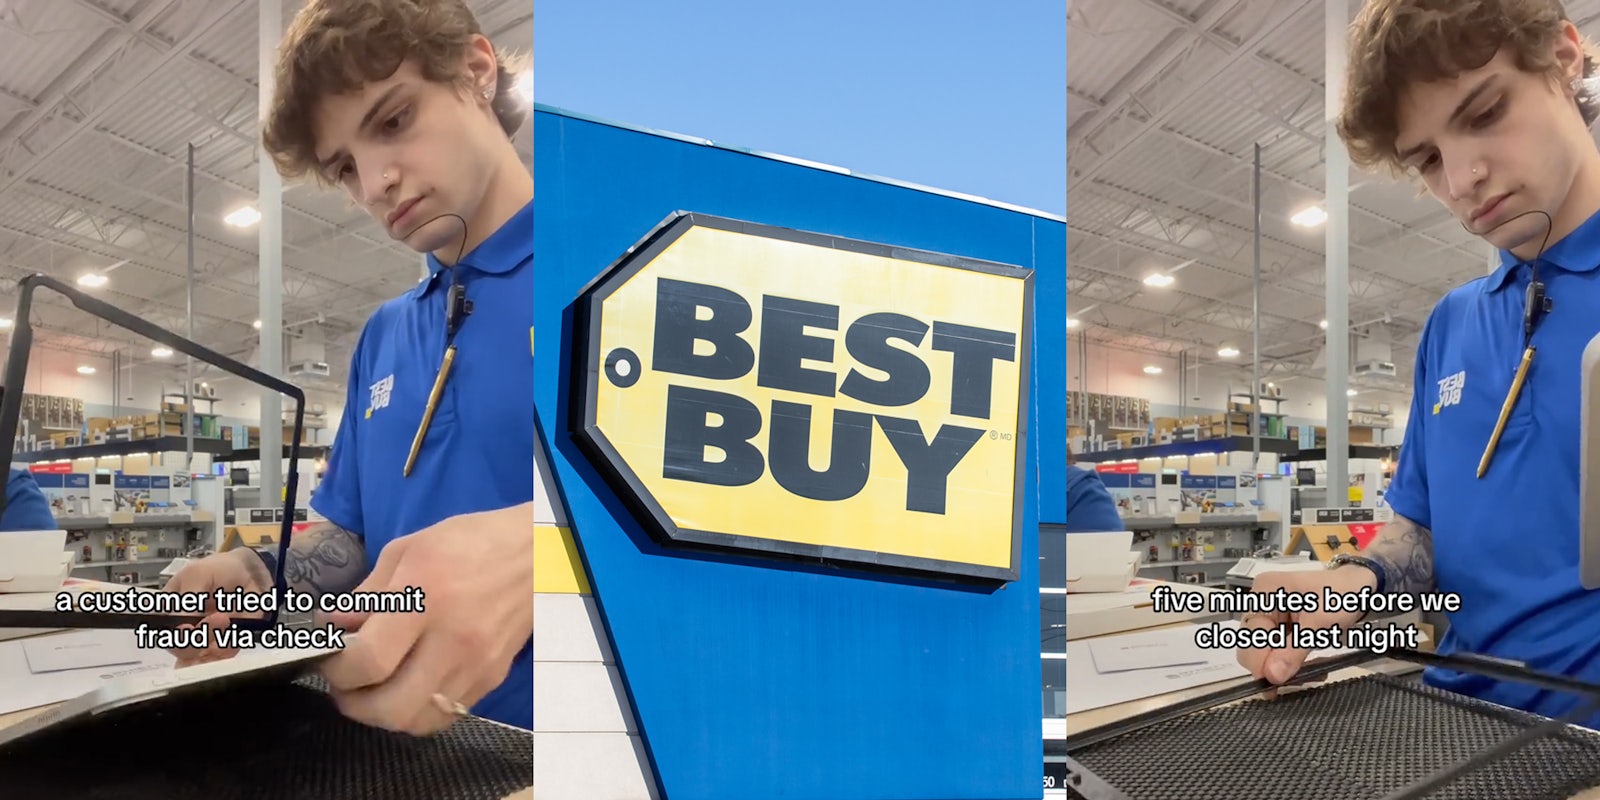 Best Buy employee with caption 'a customer tried to commit fraud via check' (l) Best Buy building with sign (c) Best Buy employee with caption 'five minutes before we closed last night' (r)